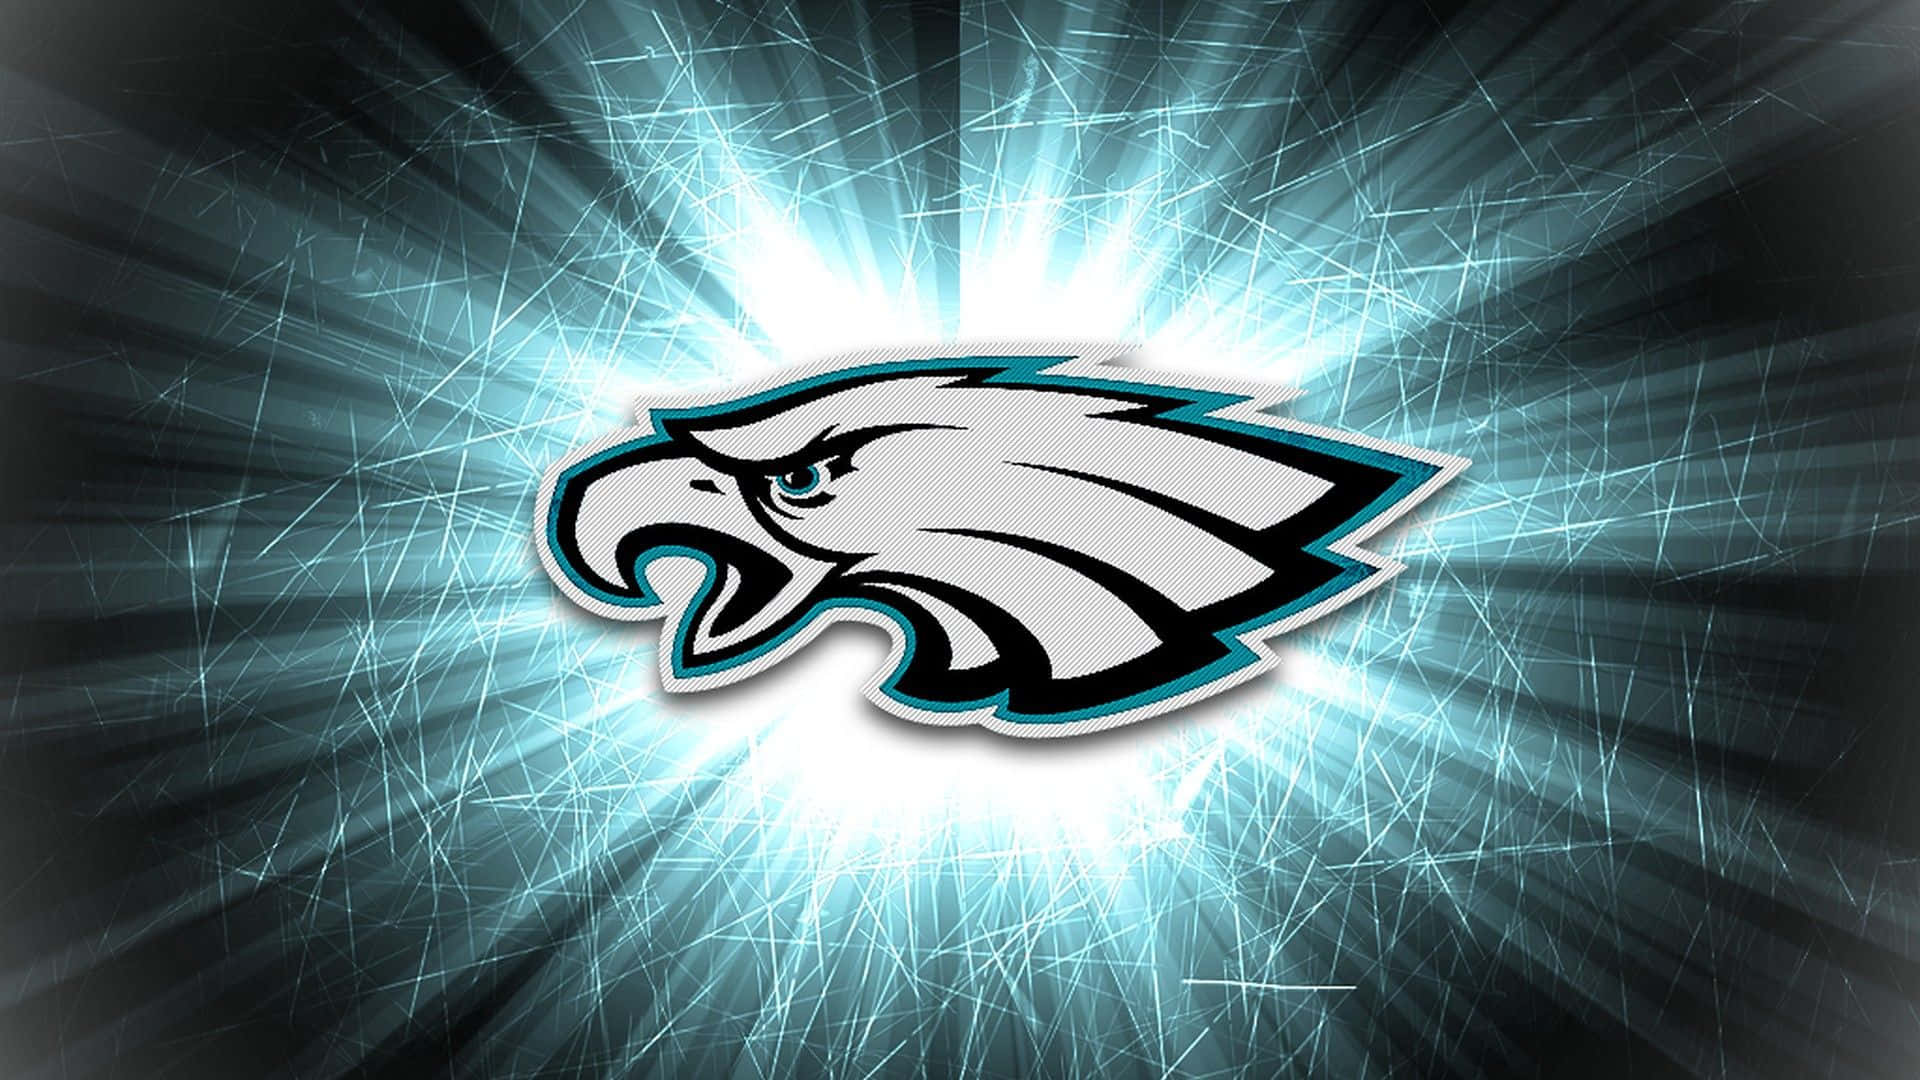 Get Ready for Eagles Football Wallpaper